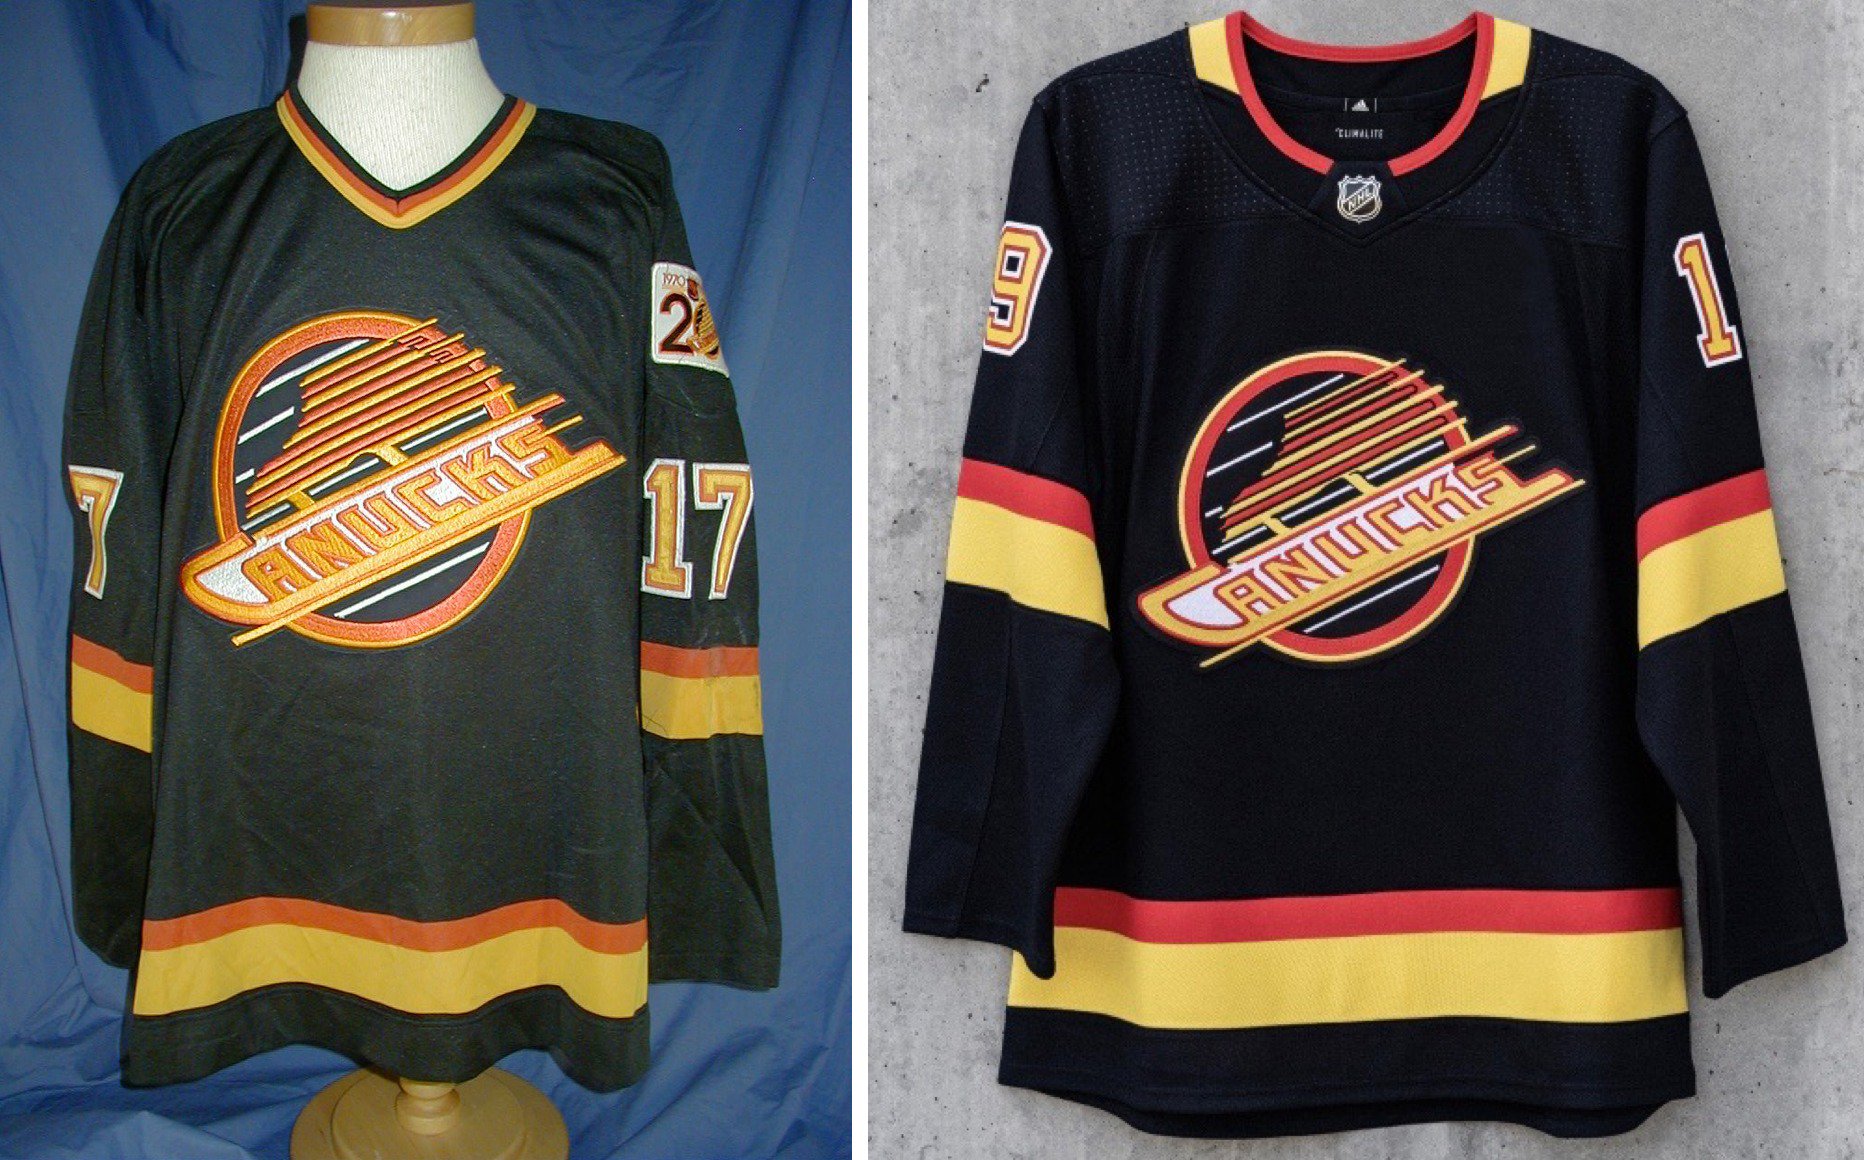 Canucks looked at dusting off the 90s flying skate jersey for Pat